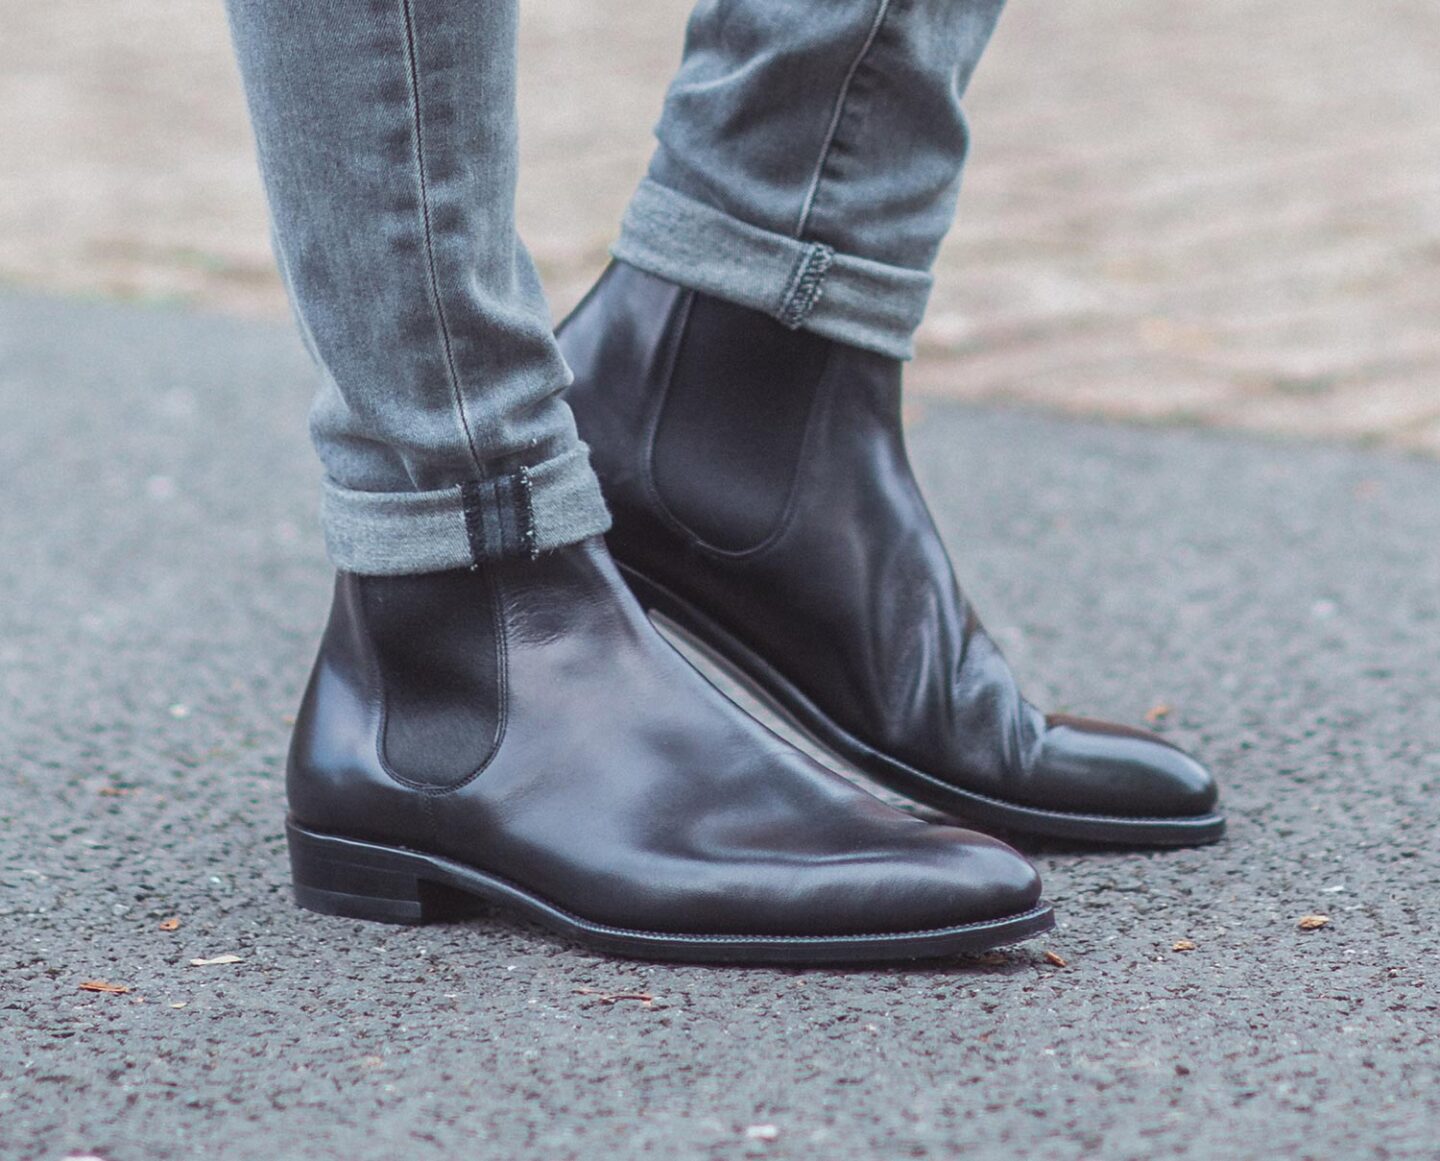 Arterton Yearn Shoemaker Chelsea Boots Review - Your Average Guy